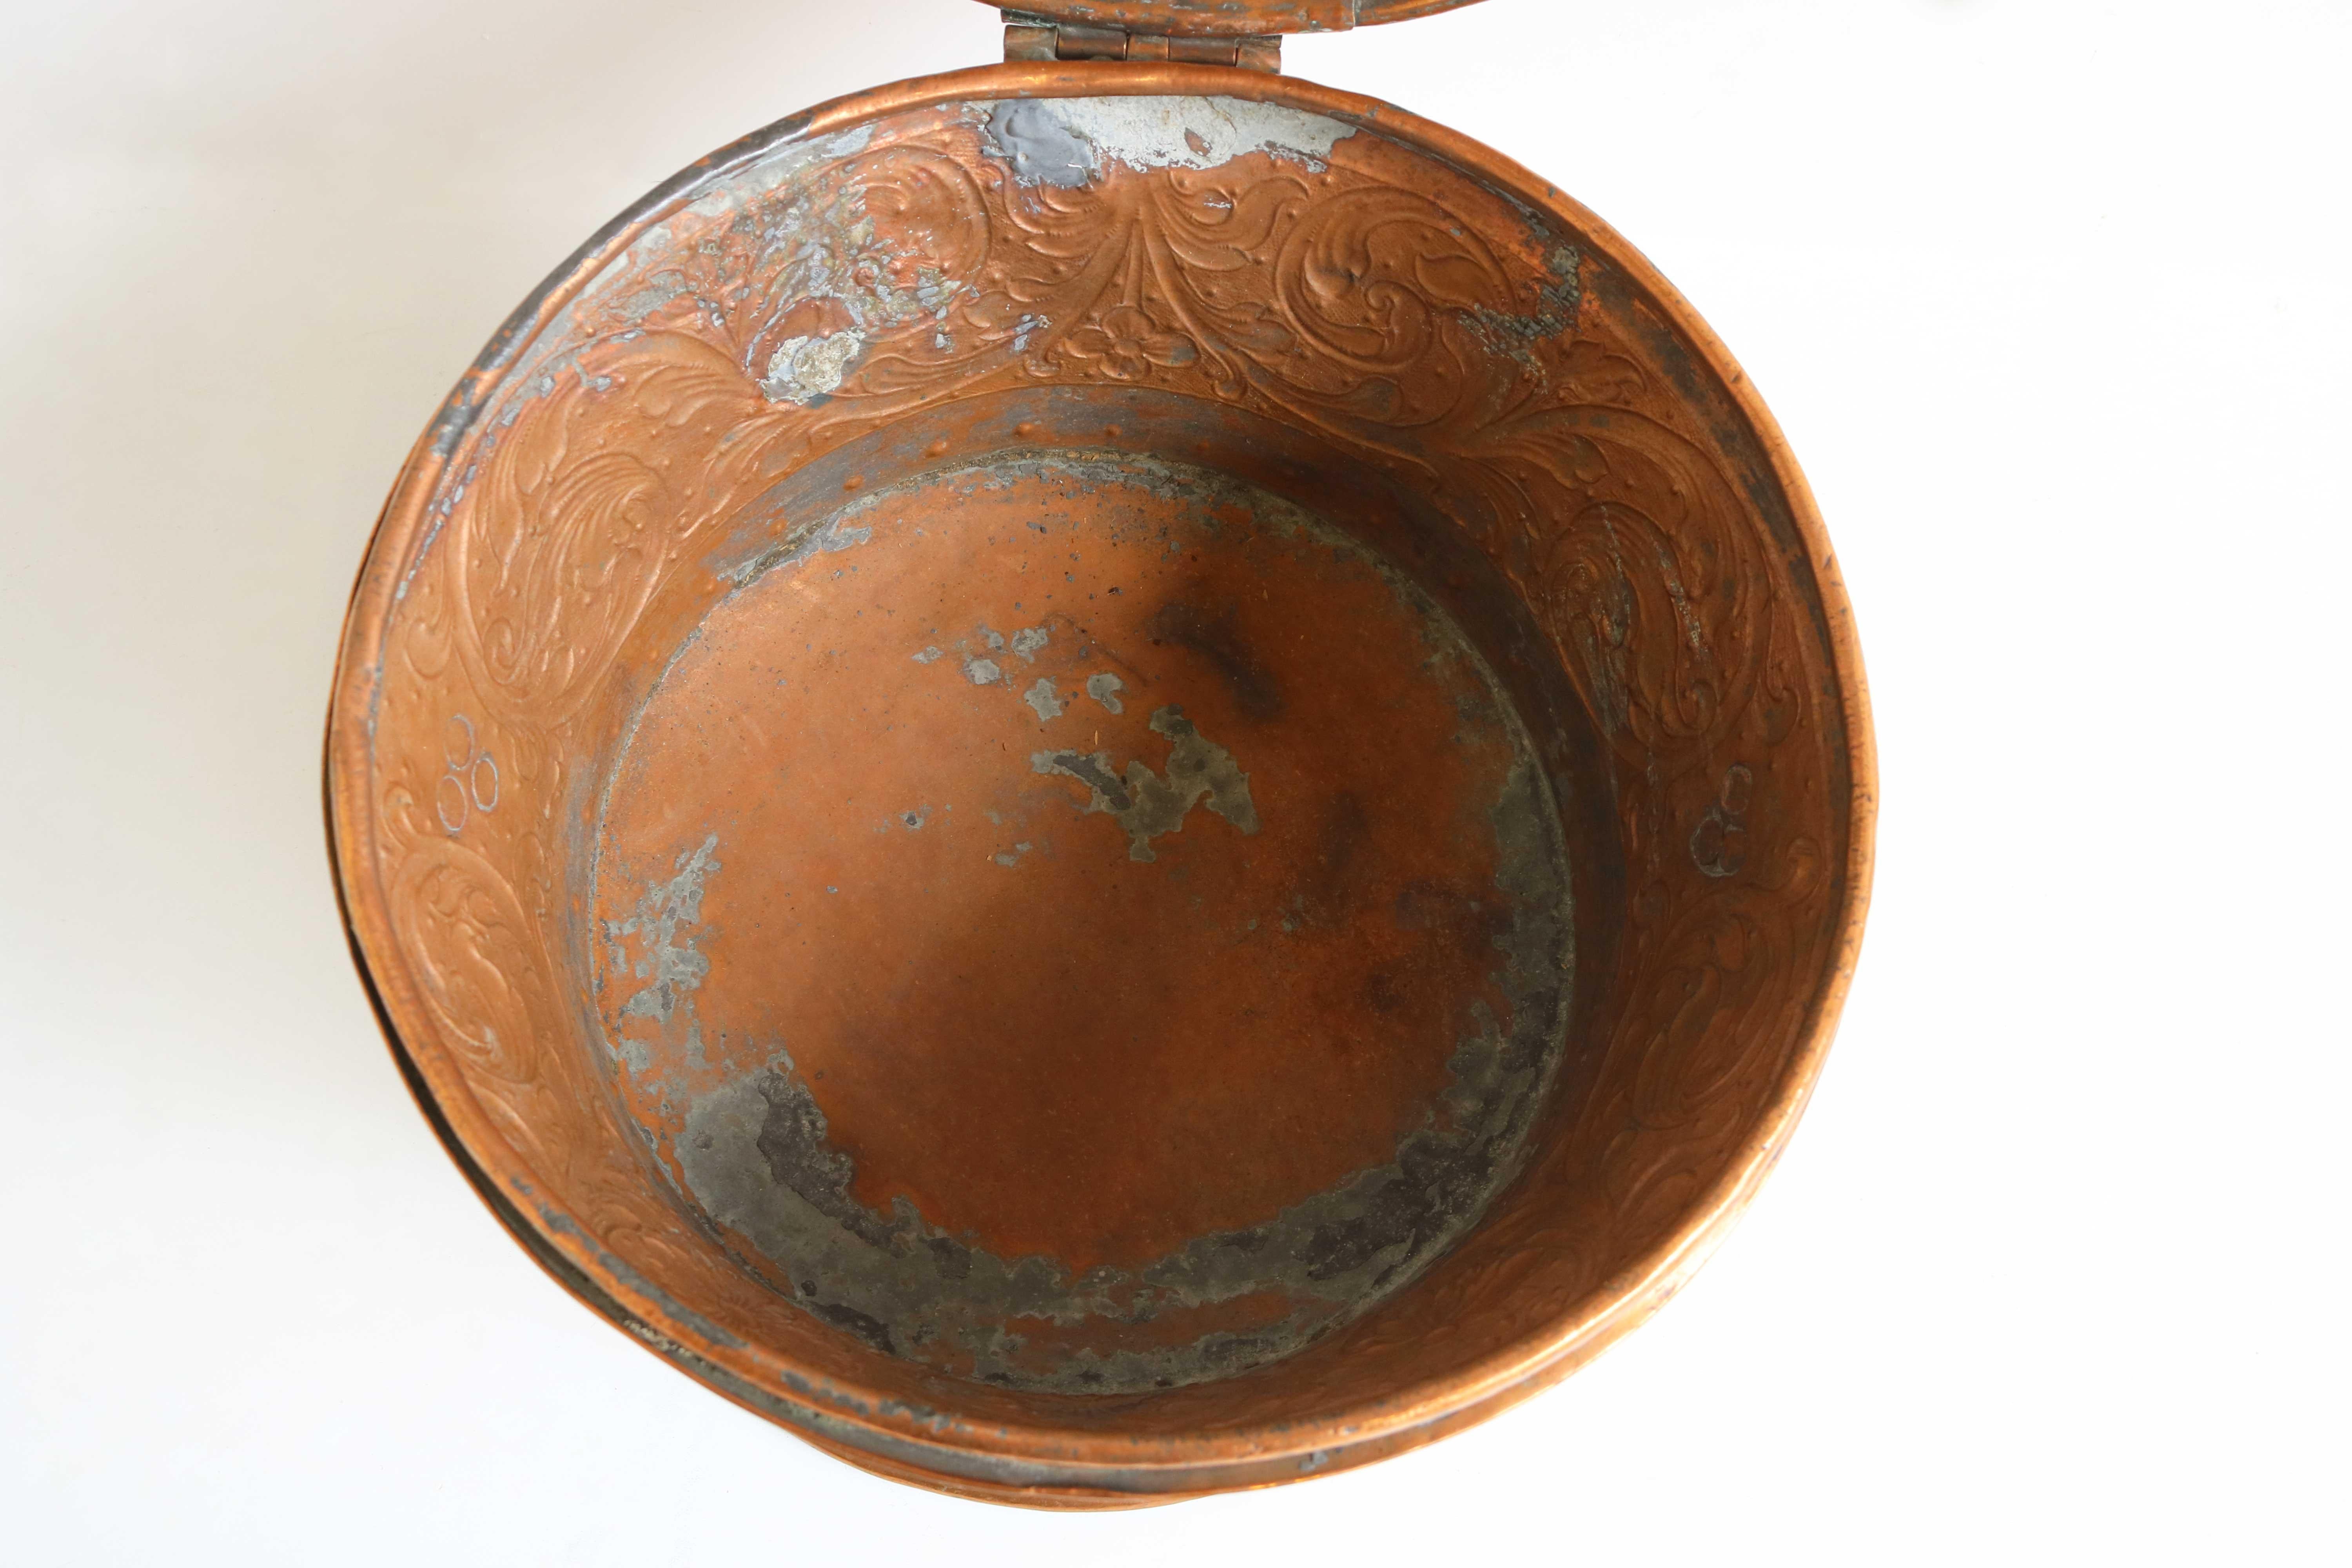 Decorated Dutch Antique Copper Bowl / Pot with Lid, 18th Century, Dated 1750 For Sale 10